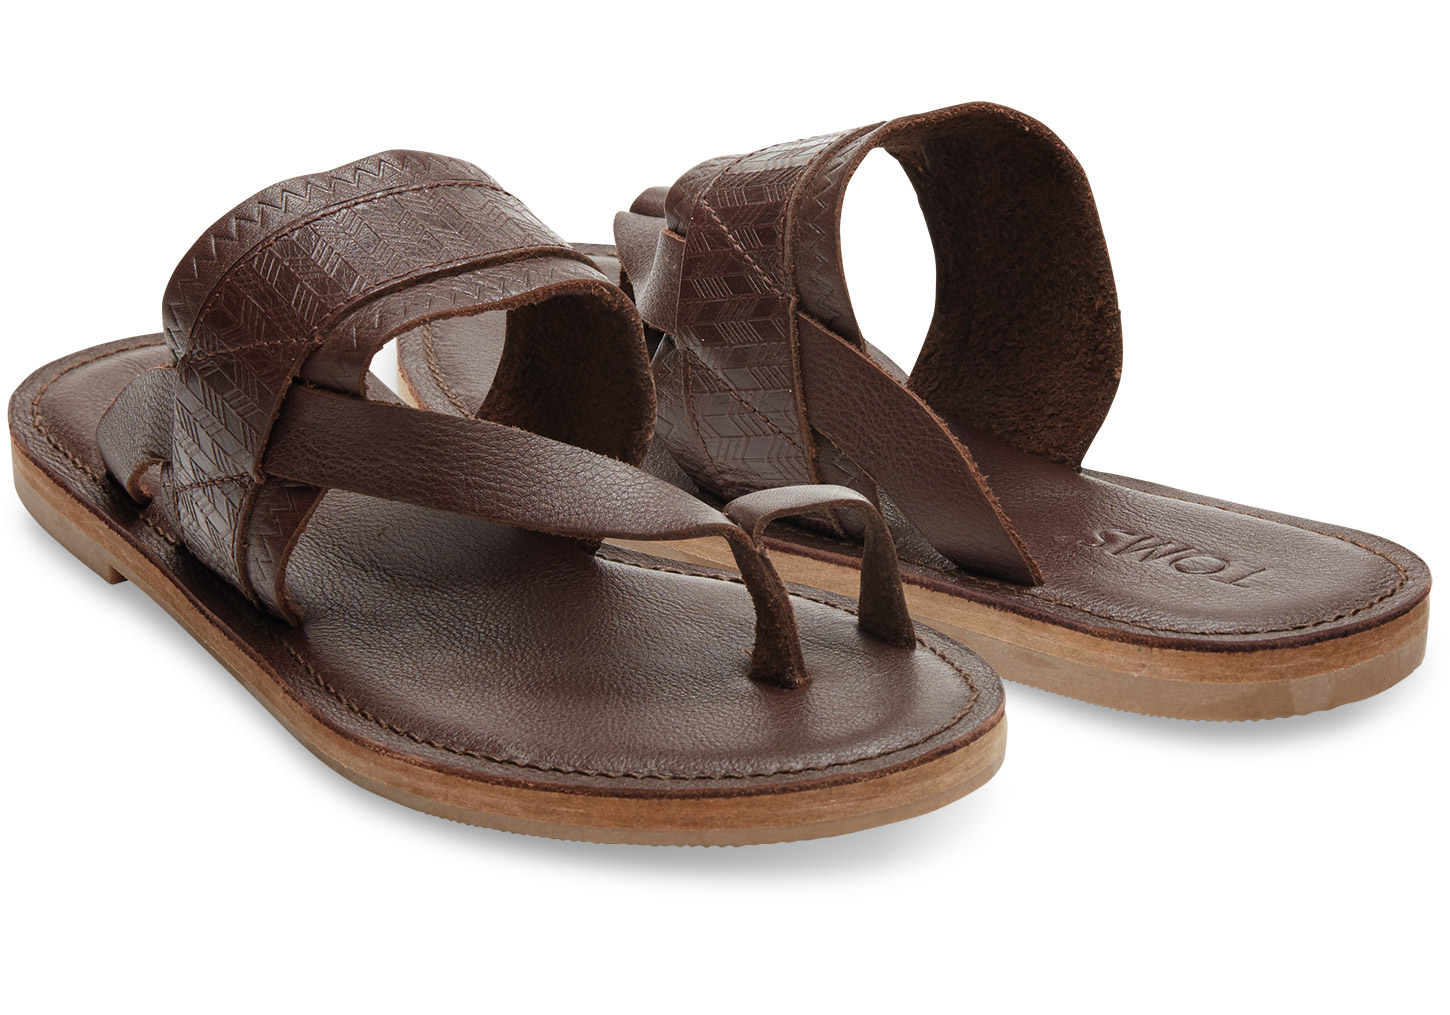 Lyst - Toms Mahogany Leather Emboss Women's Isabela Sandals in Brown